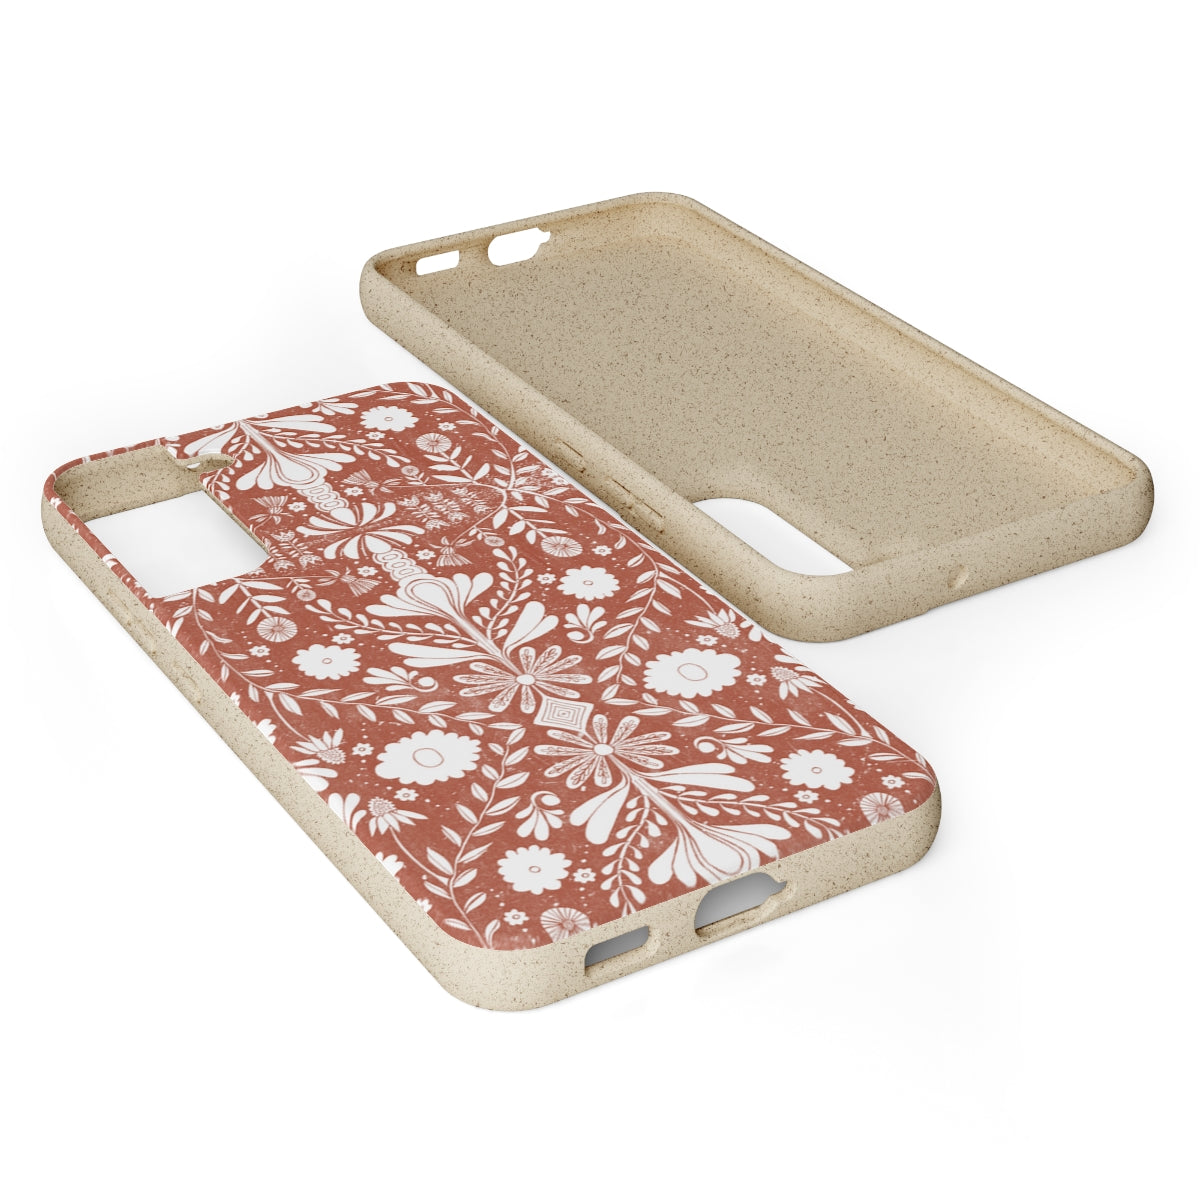 Biodegradable Cases [Fire]